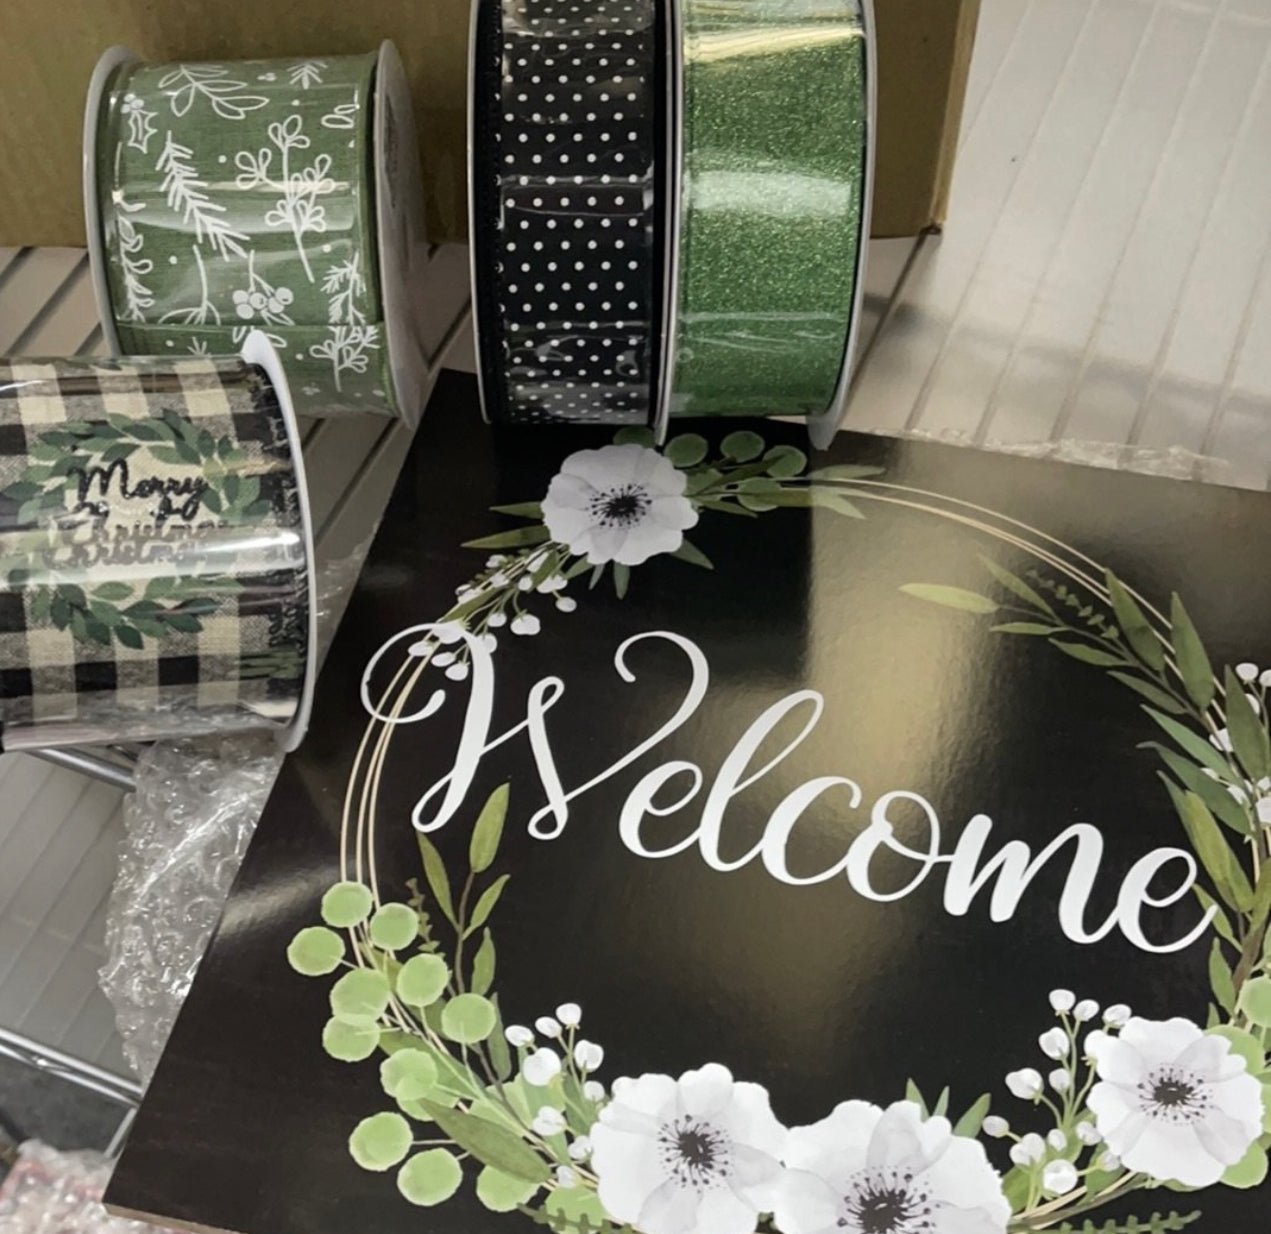 Black and white welcome flower 10” square - Greenery Marketsigns for wreathsap710927